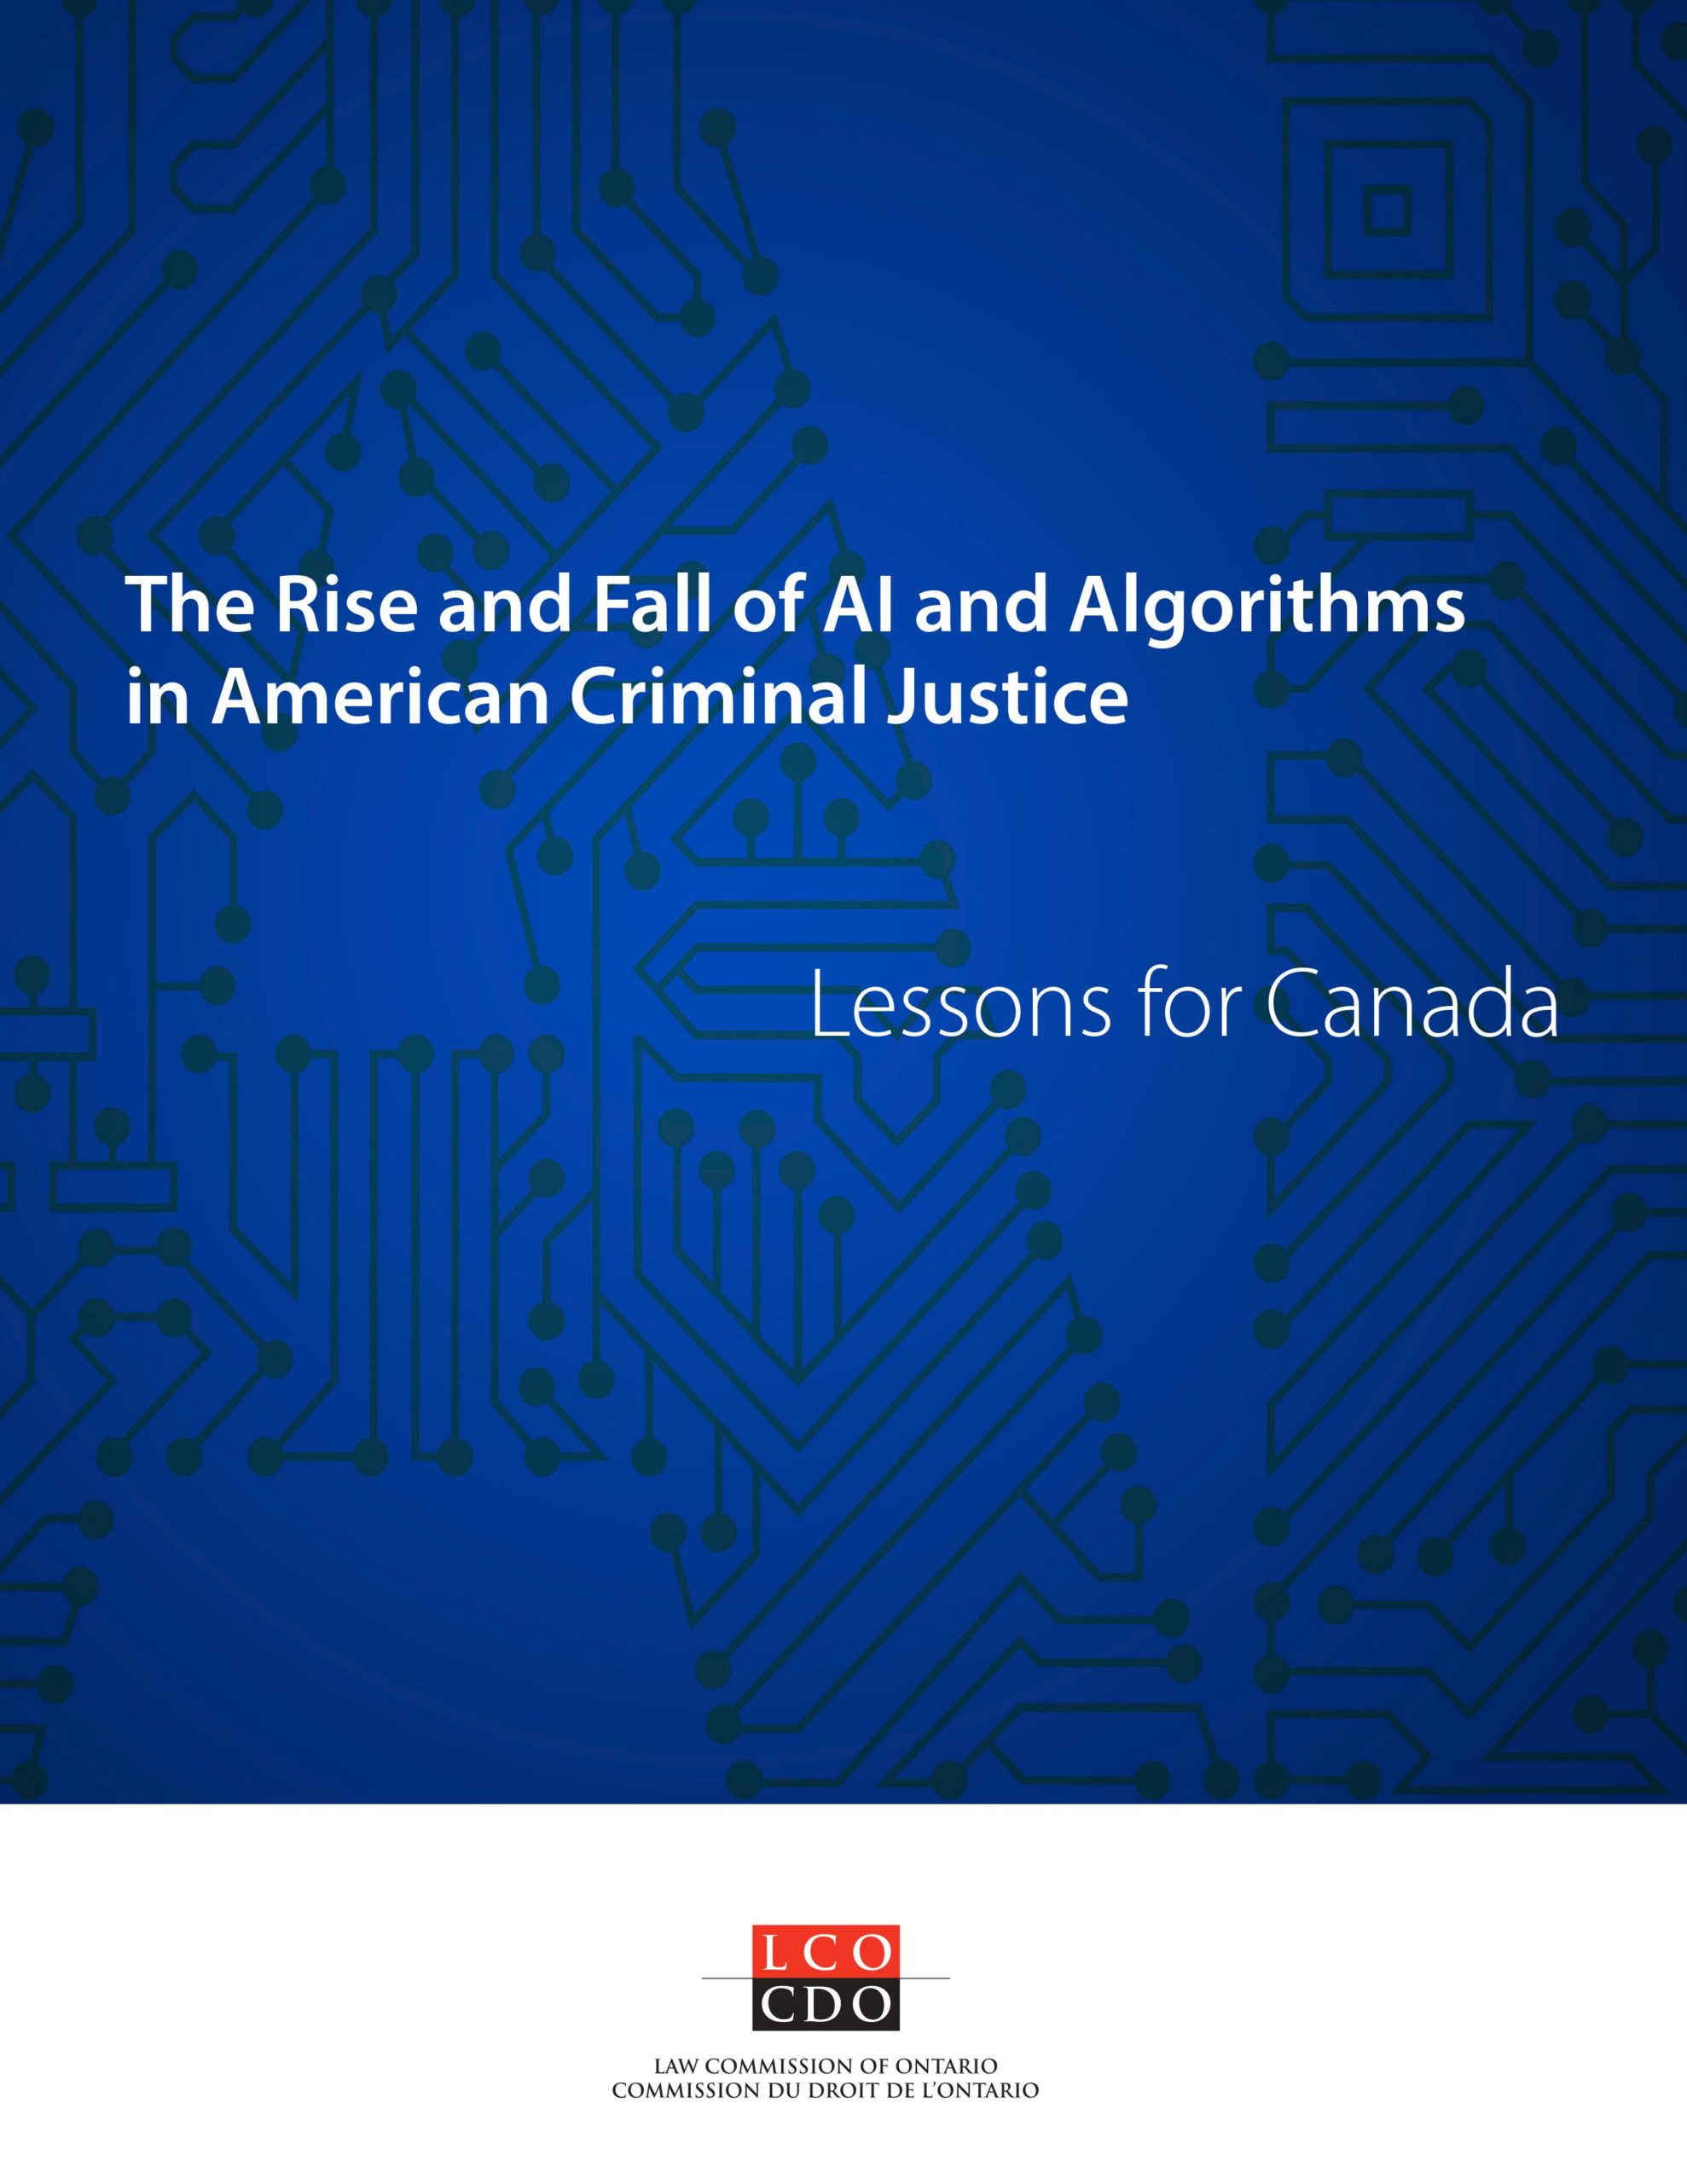 Blue background image which has AI on it. It also has a title written on it "The Rise and Fall of Algorithms in American Criminal Justice: Lessons for Canada".